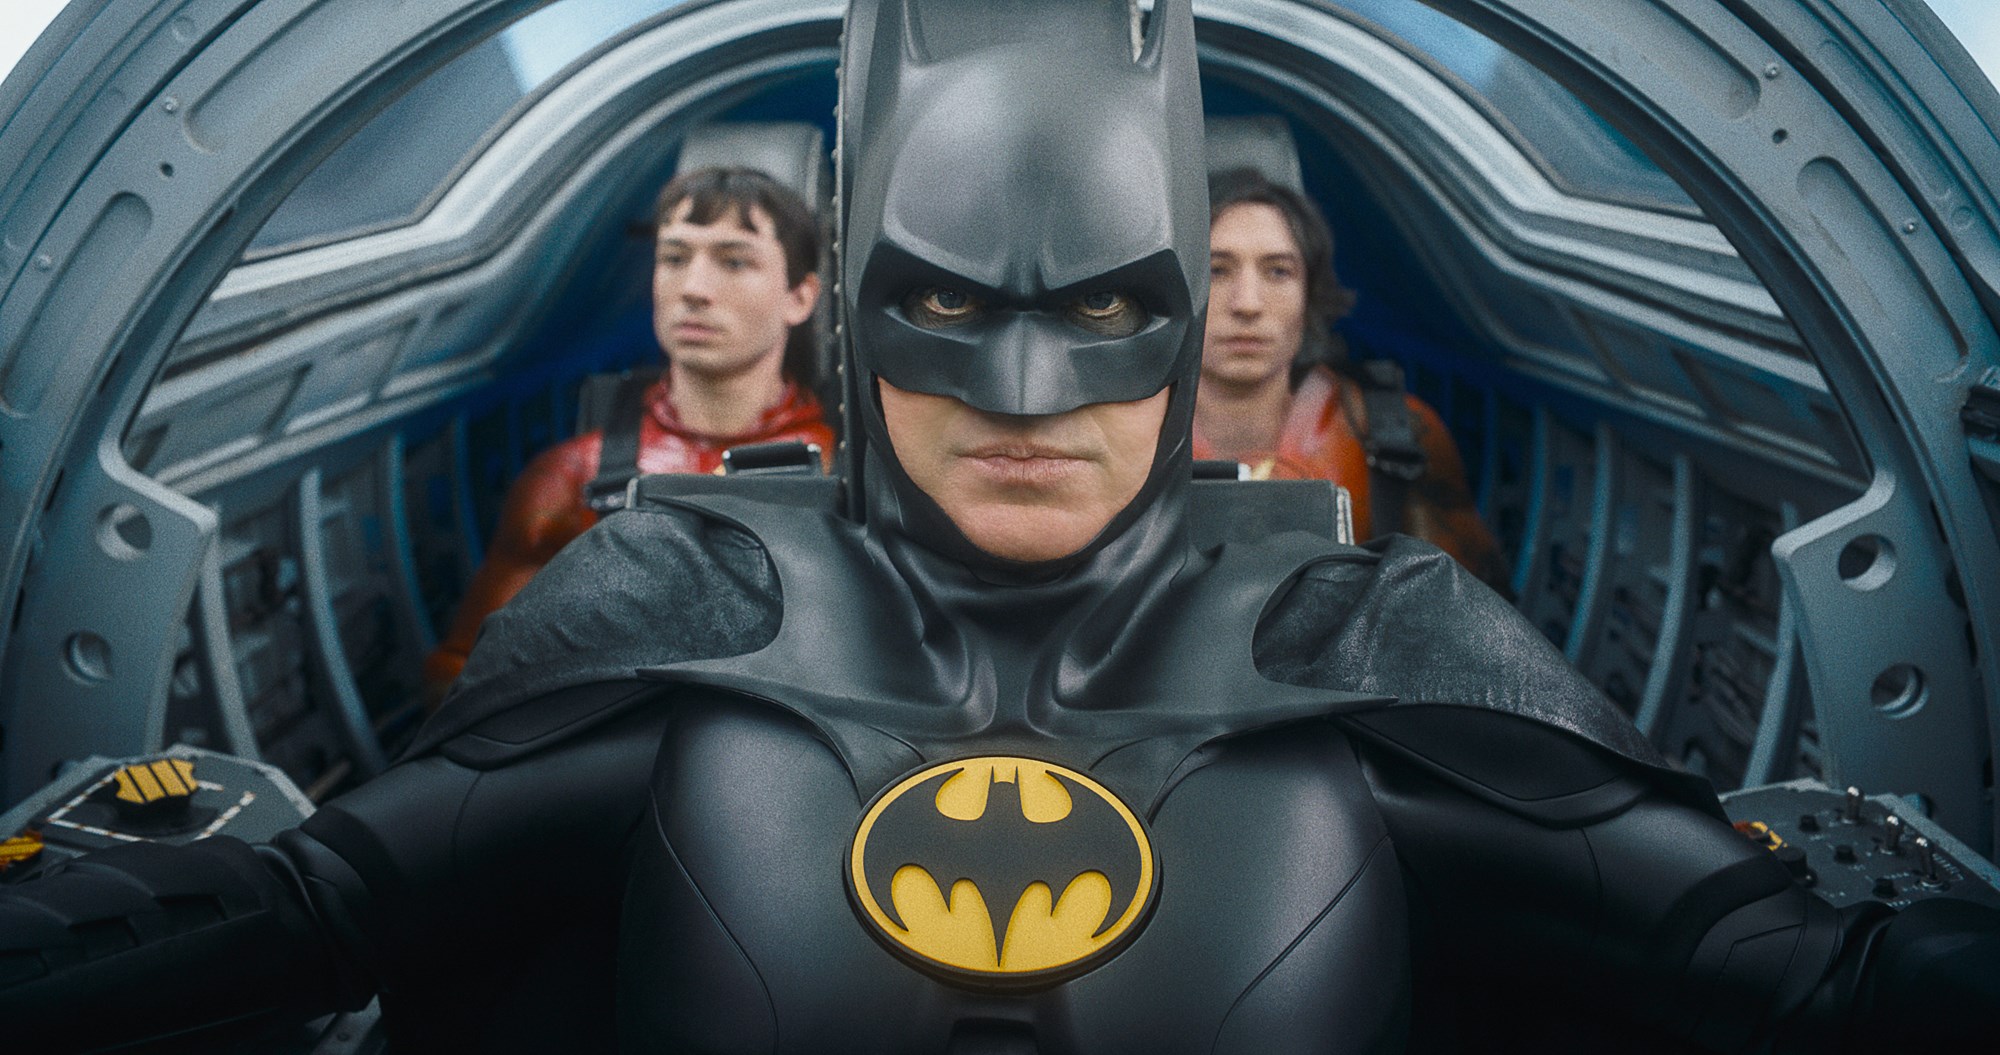 Michael Keaton returns as Batman after 30 years. With Ezra Miller as The Flash, and Ezra Miller as The Flash.